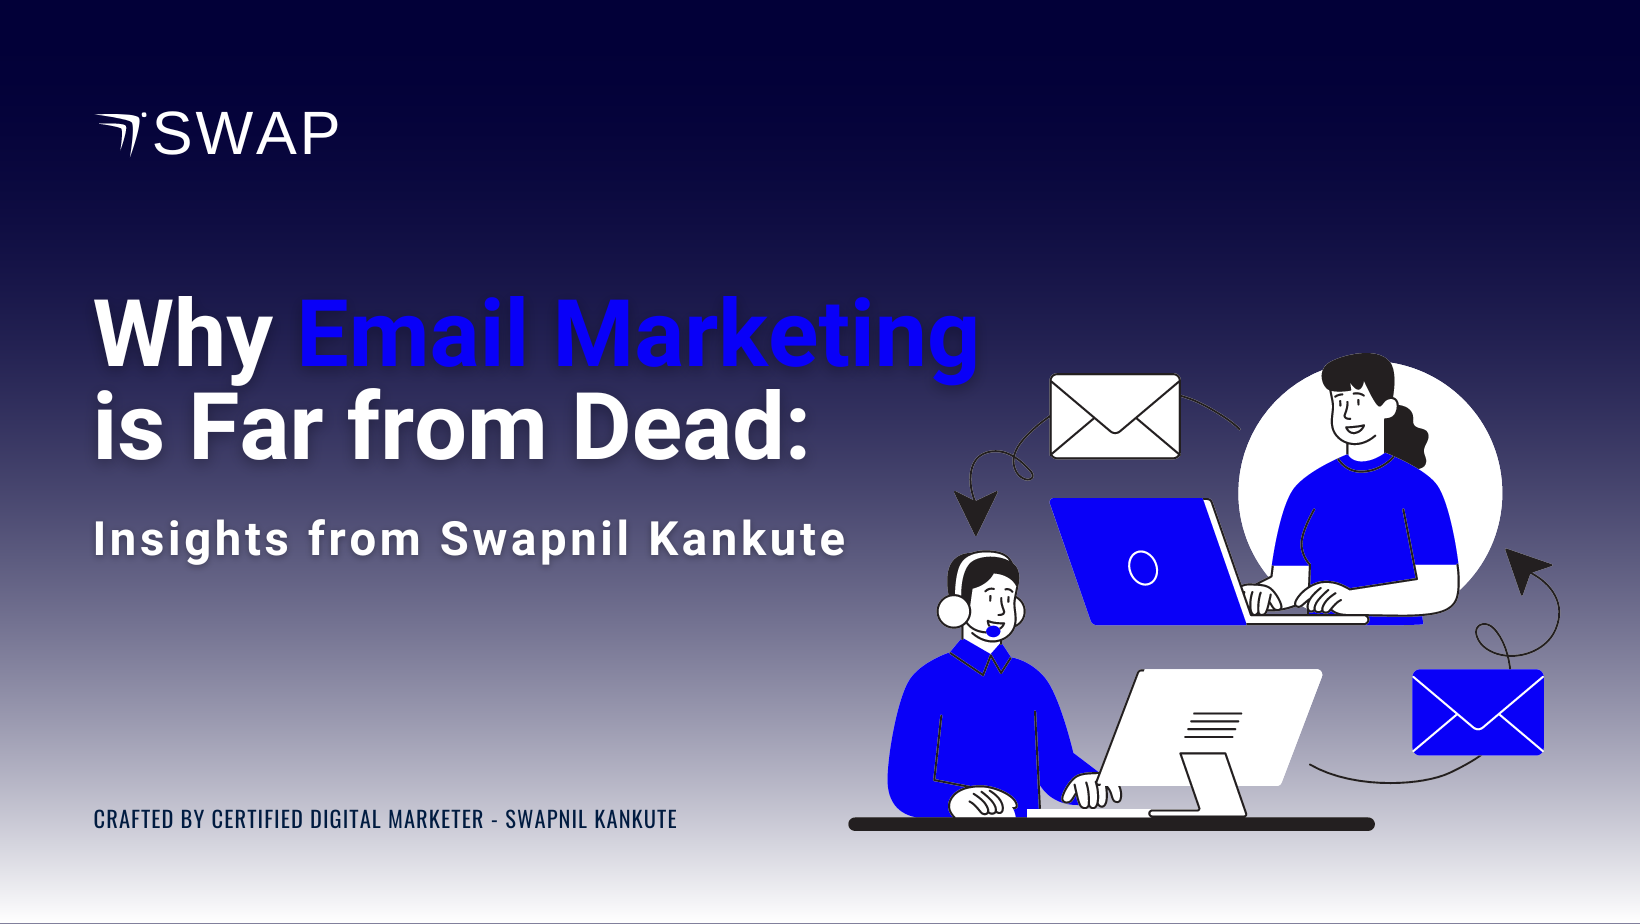 Why Email Marketing is Far from Dead: Insights from Swapnil Kankute